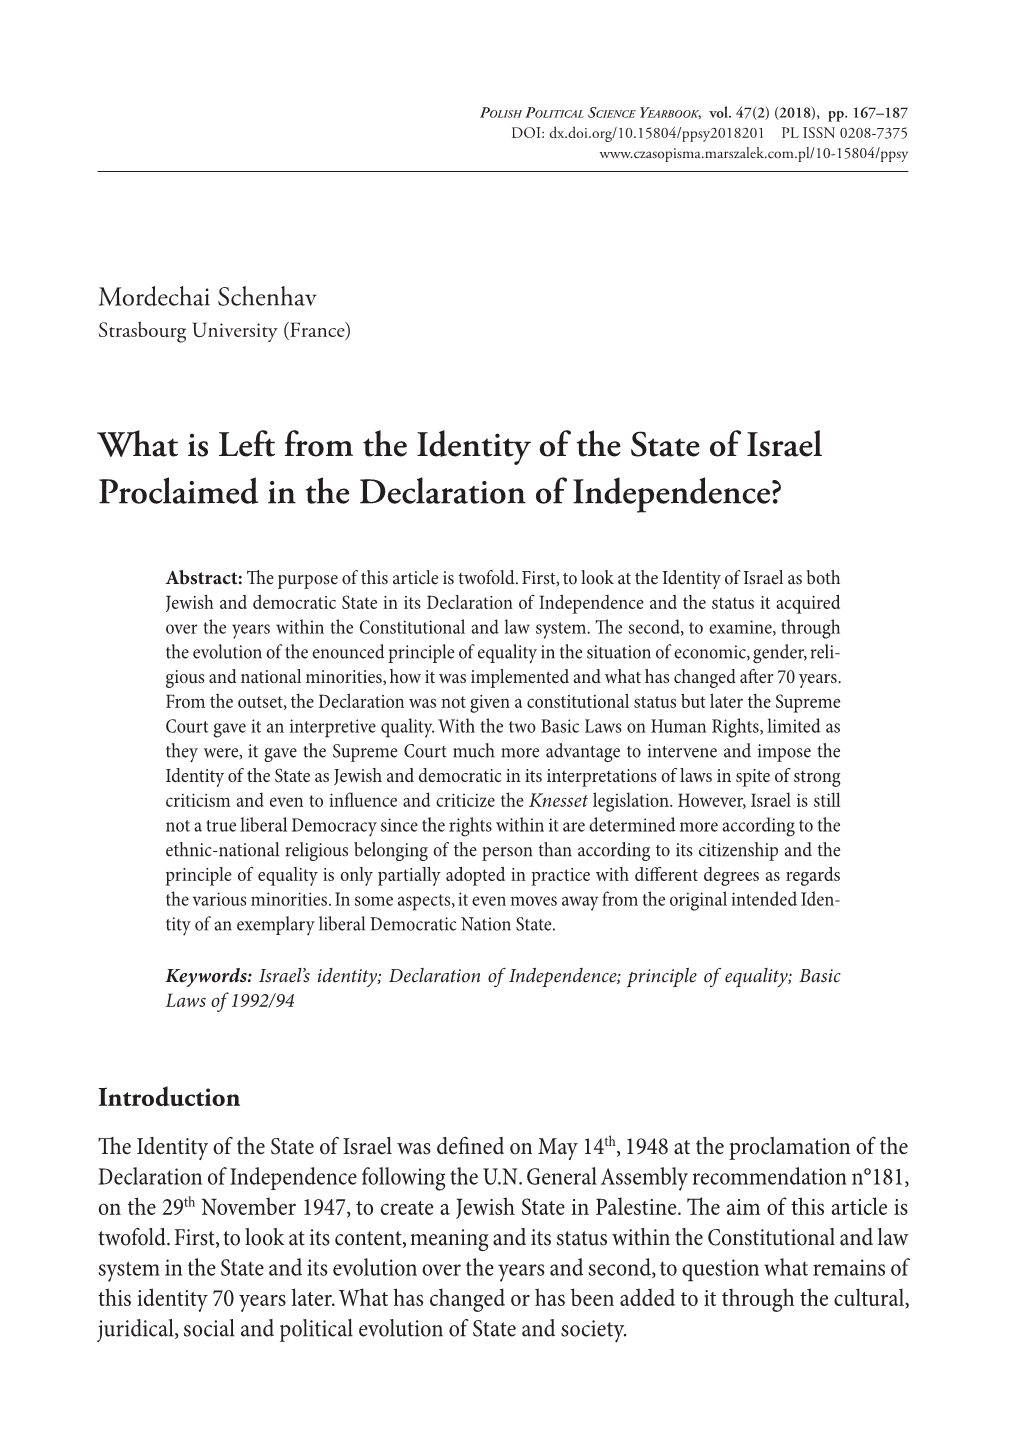 What Is Left from the Identity of the State of Israel Proclaimed in the Declaration of Independence?